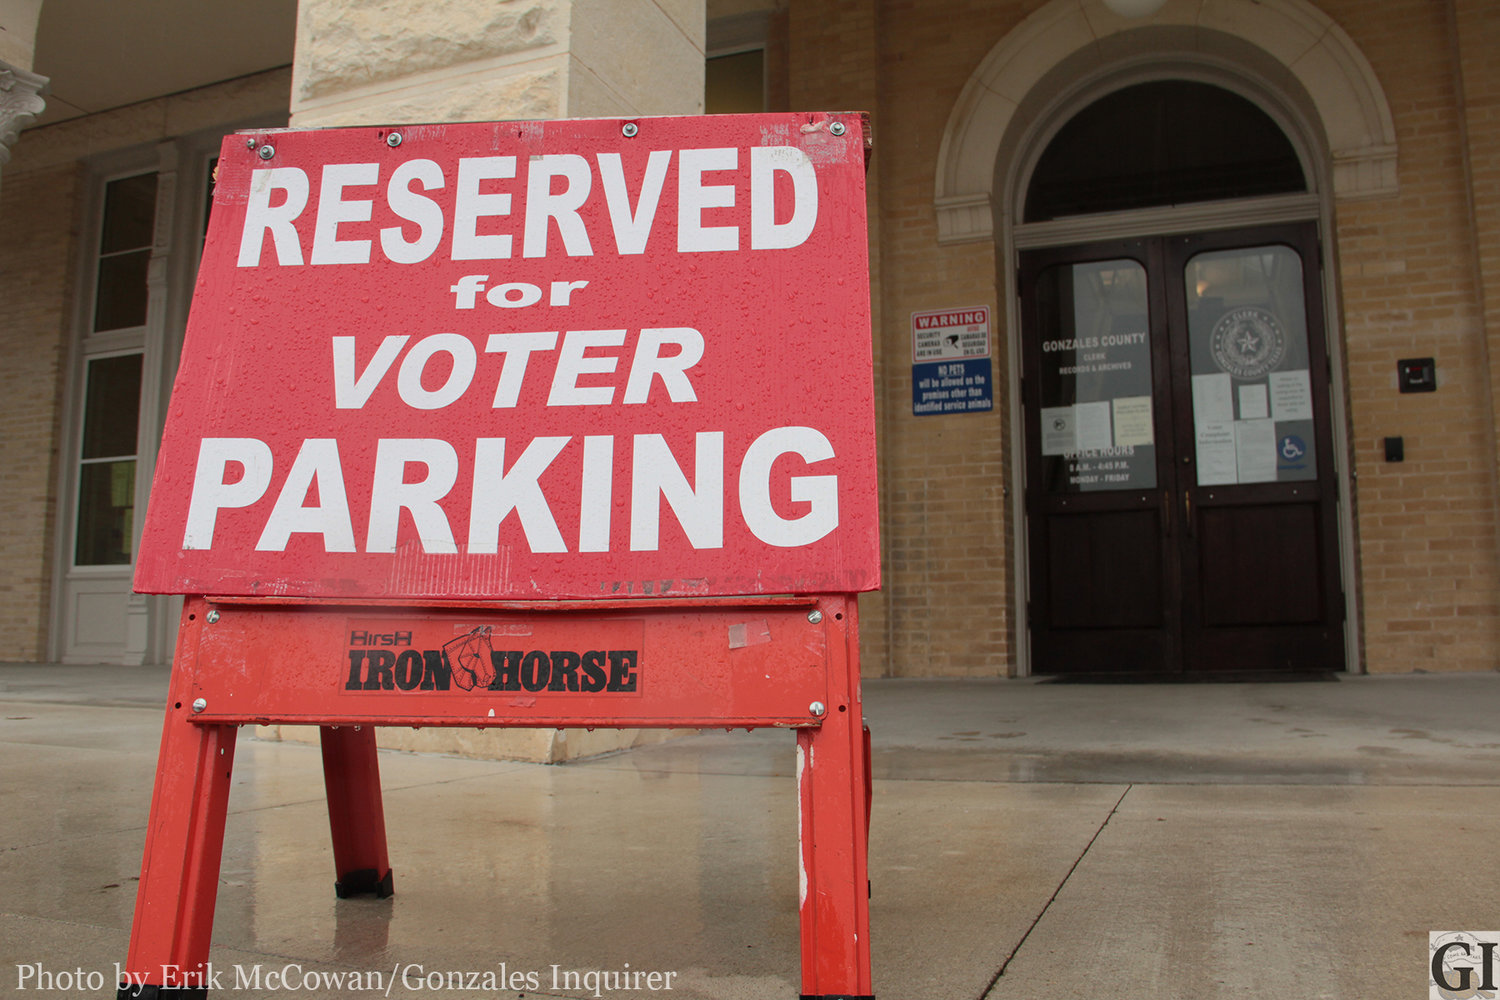 Gonzales County has rolled out the red carpet for early voting, or at least the reserved parking spaces. People met poll workers on Monday, with lines said to be inching out the door of the Randle-Rather Bldg. Wednesday was a little slower, likely because of the dreary conditions.